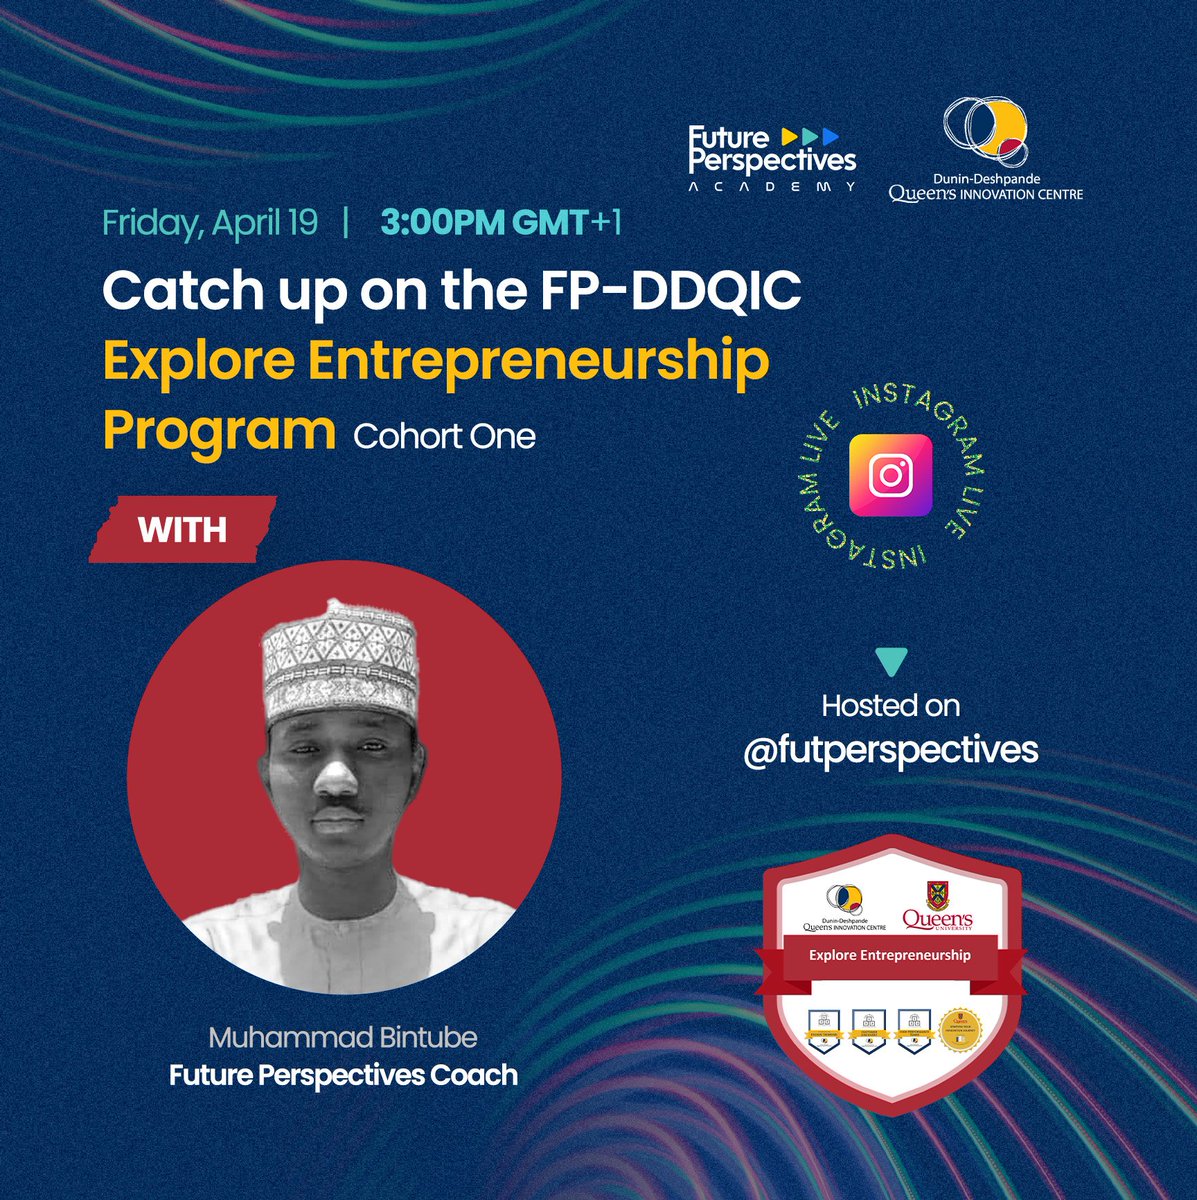 Meet our guest @muhammadbintube who has coached #itet Fellows through the Explore Entrepreneurship course. Learn about his experience.

Don't miss out. Make sure you join us live and ask your questions! 

Date: Friday, April 19, 2024
Time: 3:00pm

See you there!